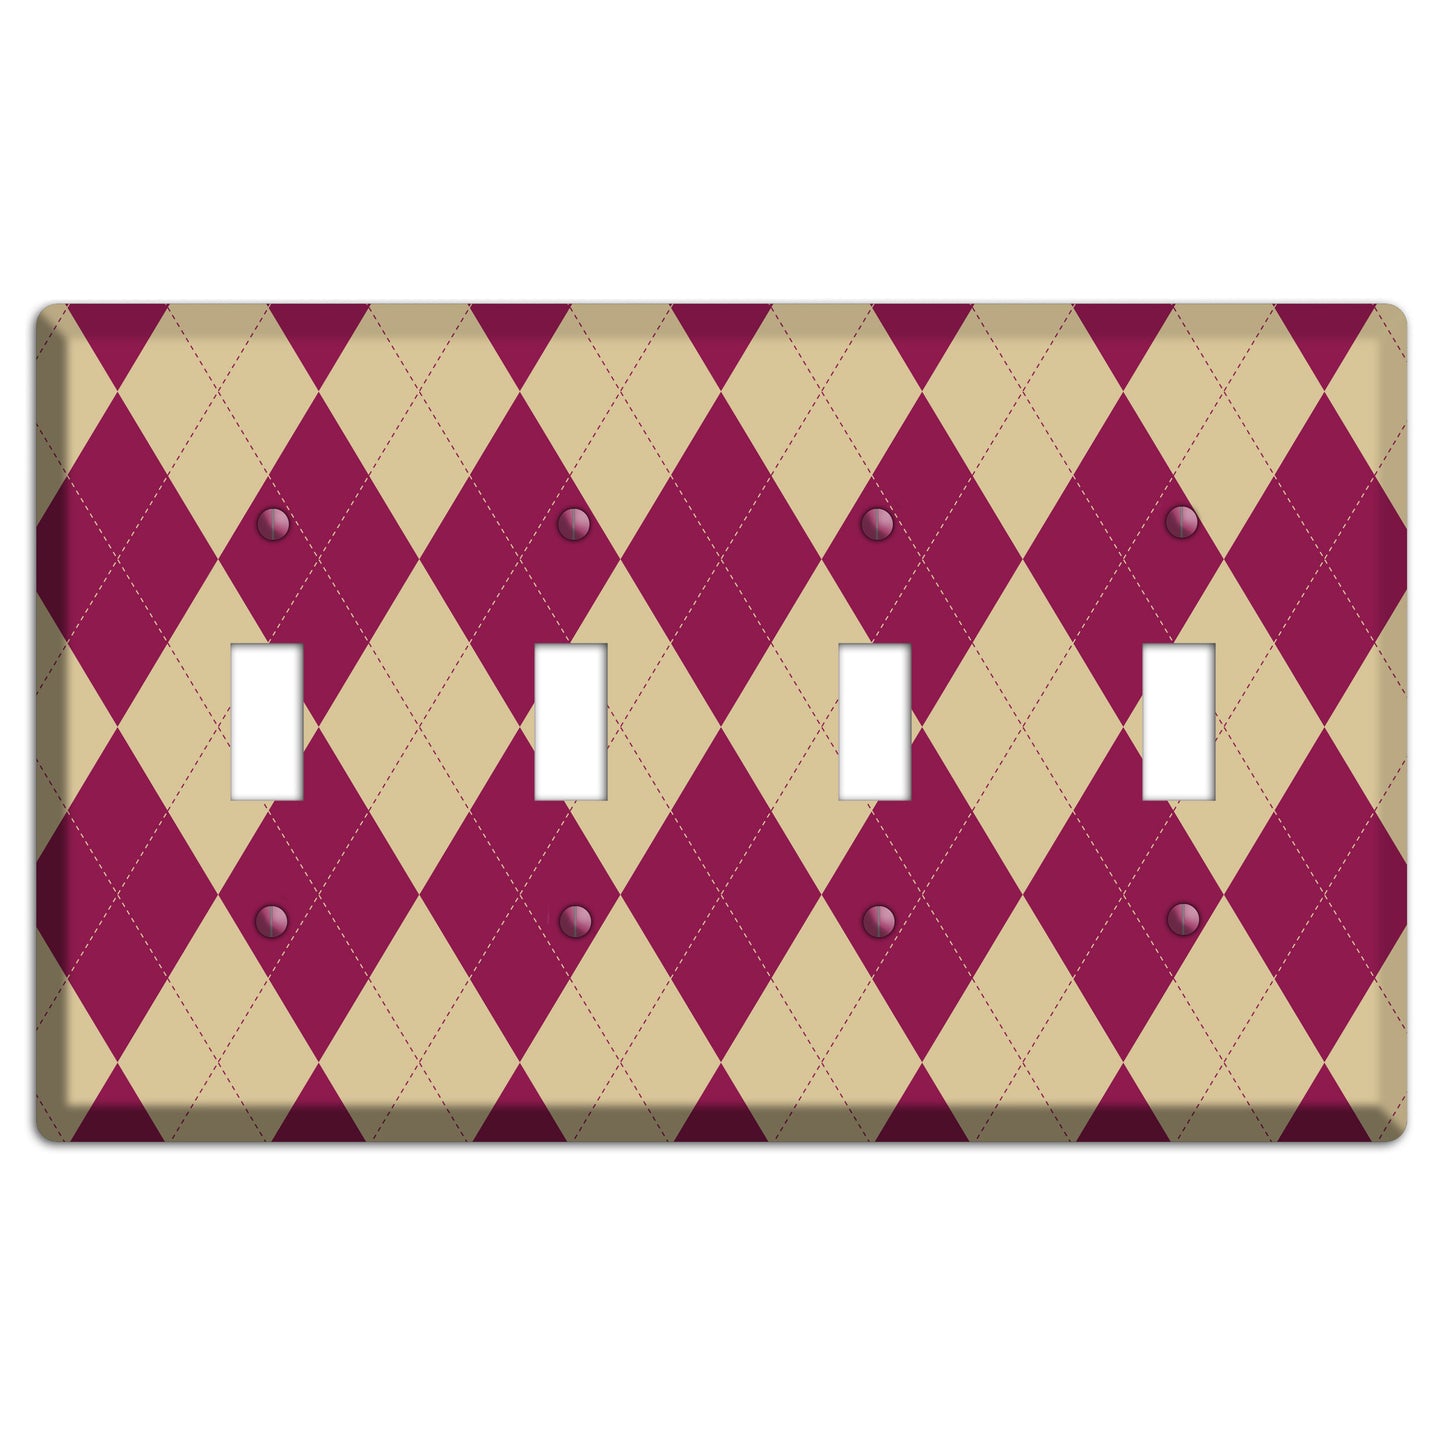 Red and Tan Argyle 4 Toggle Wallplate